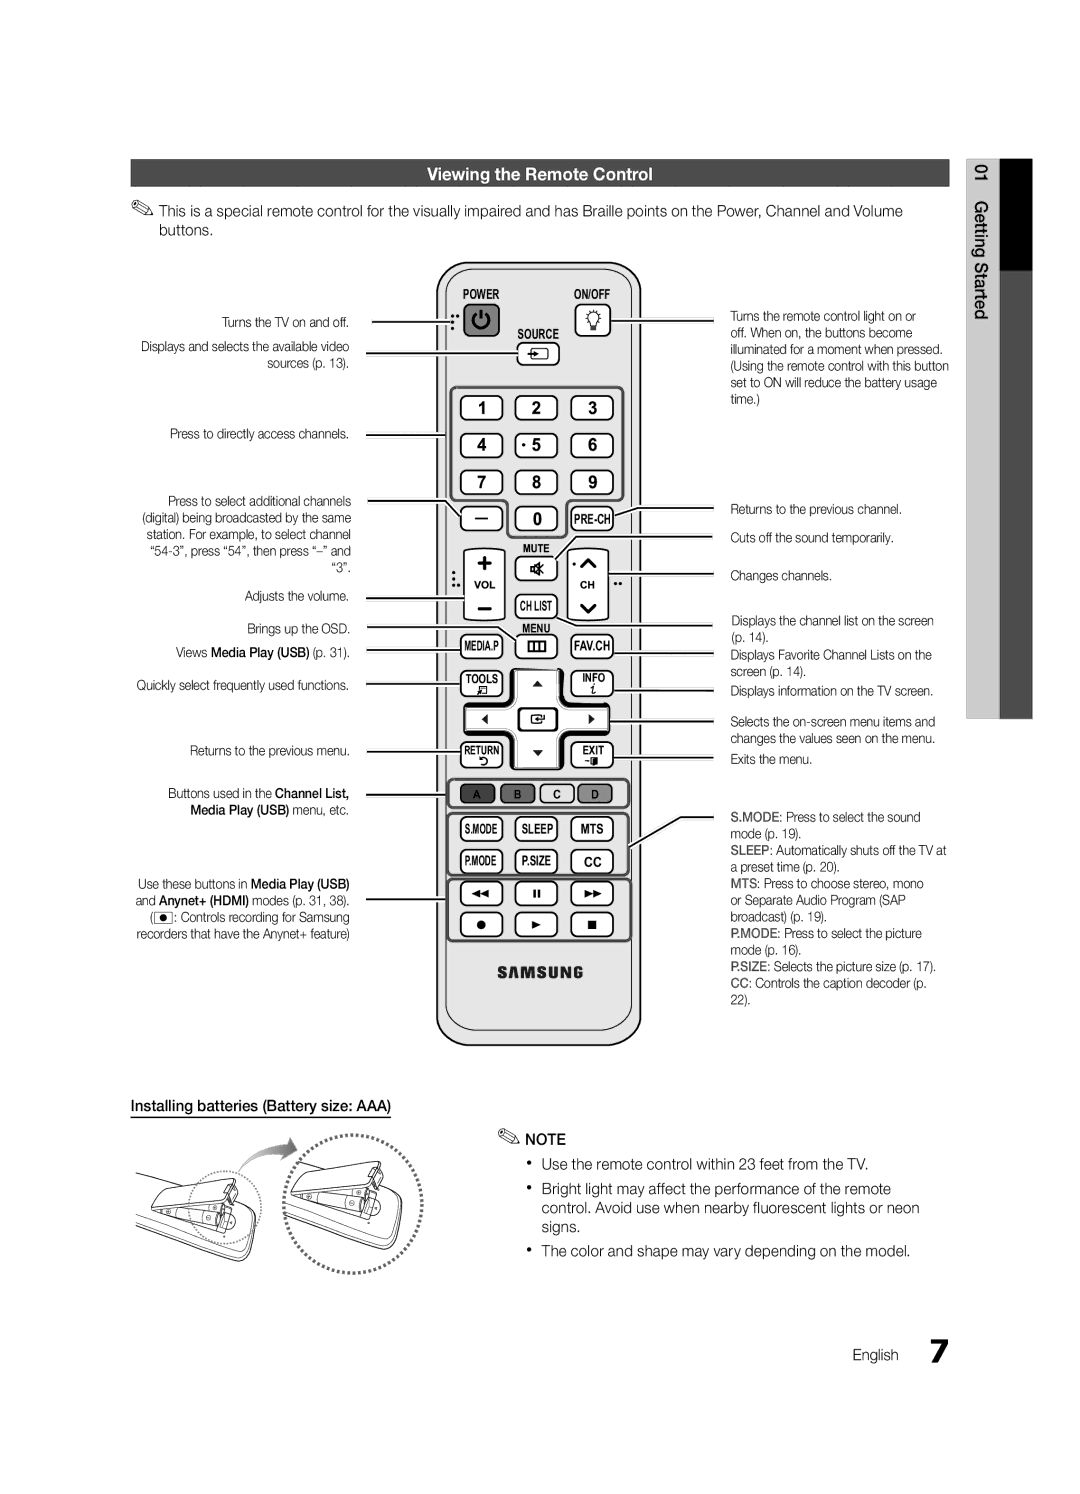 Samsung UC5000 user manual Viewing the Remote Control, Started, Turns the TV on and off, Press to directly access channels 